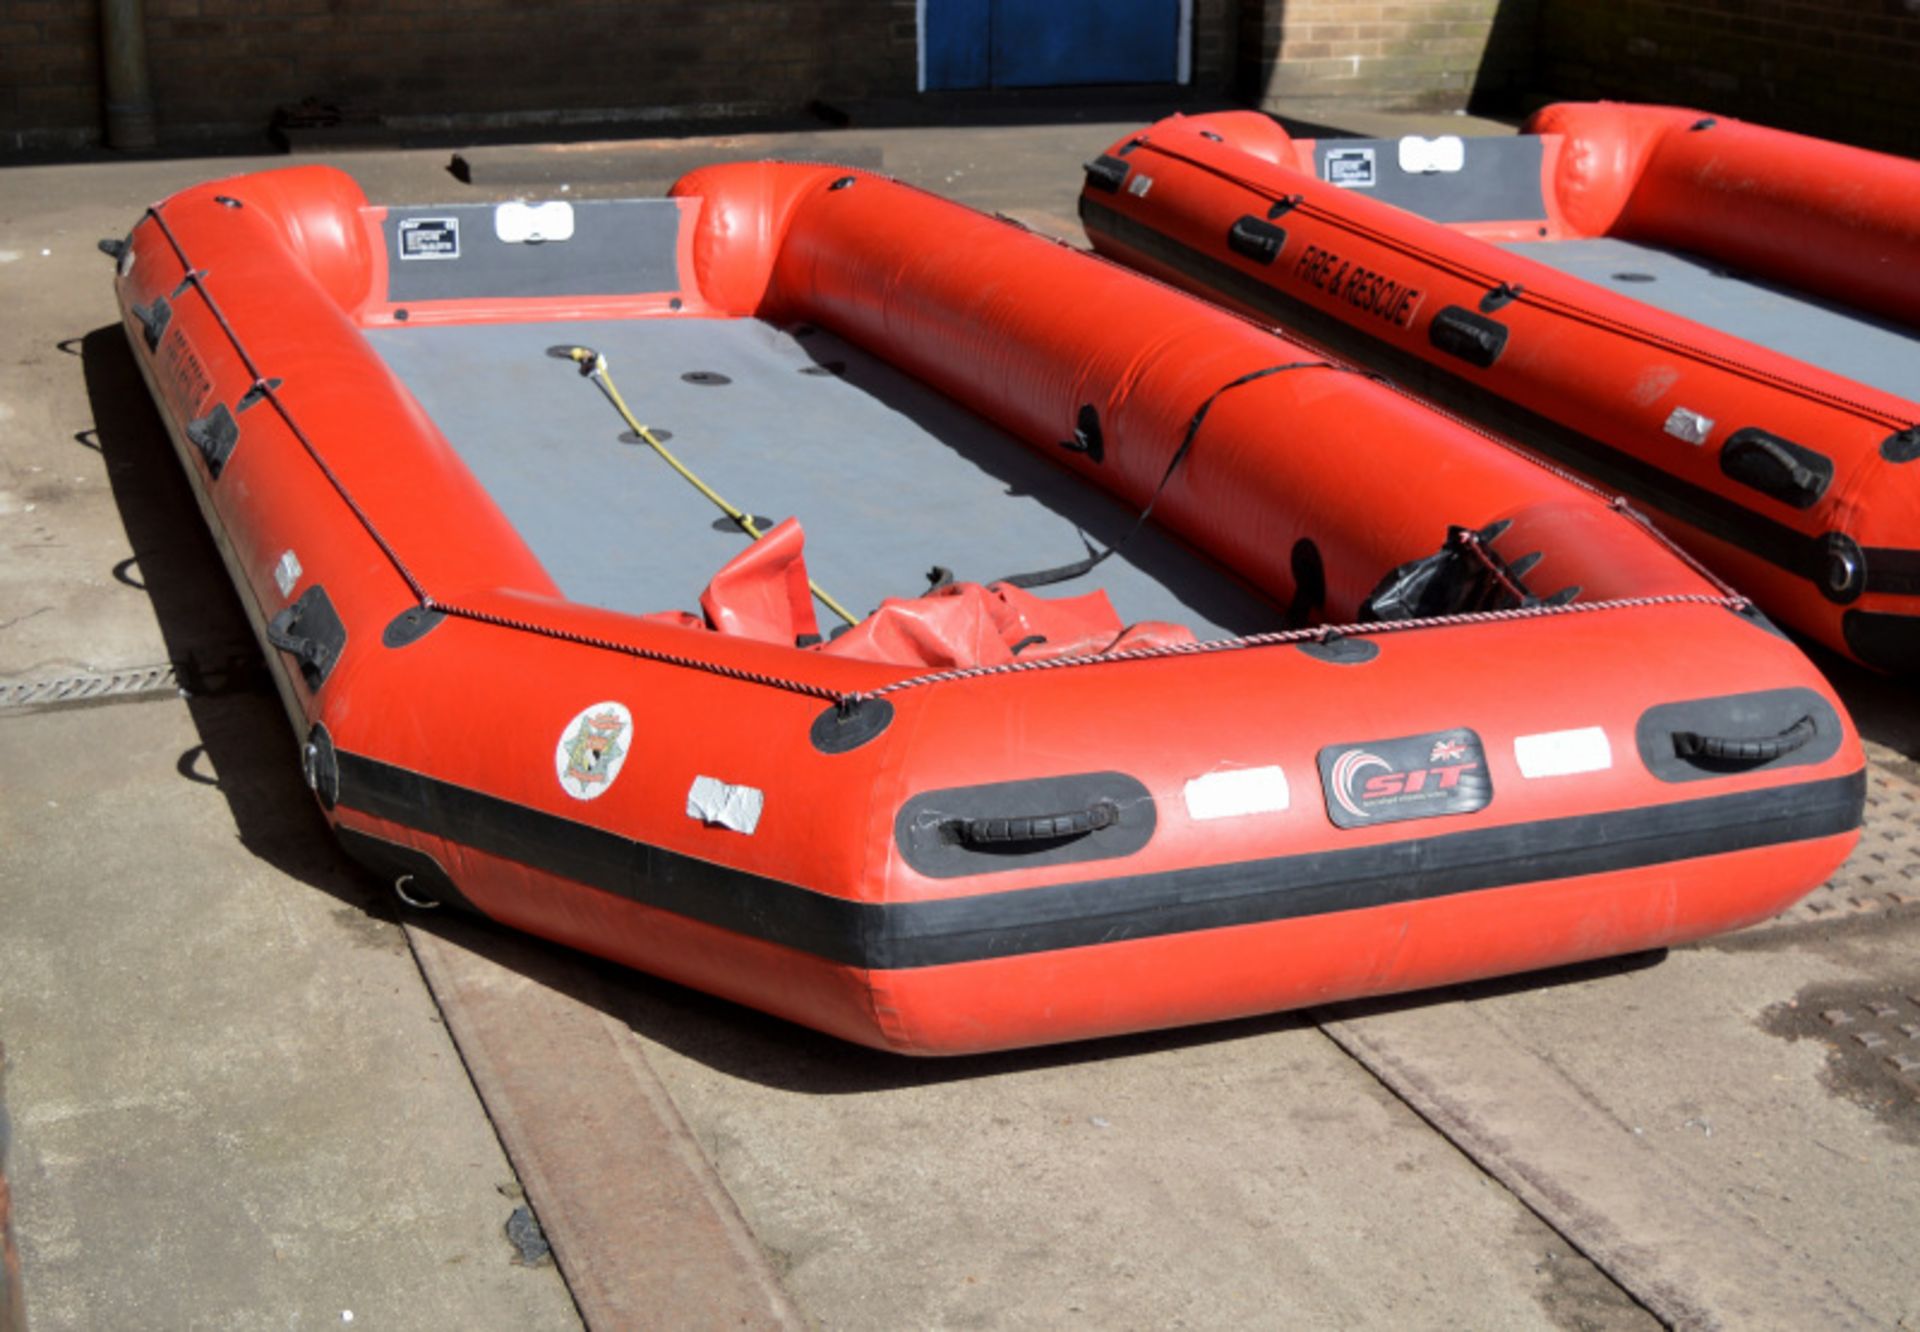 SIT Safequip ReqQraft Flood 15 inflatable boat - Image 2 of 11